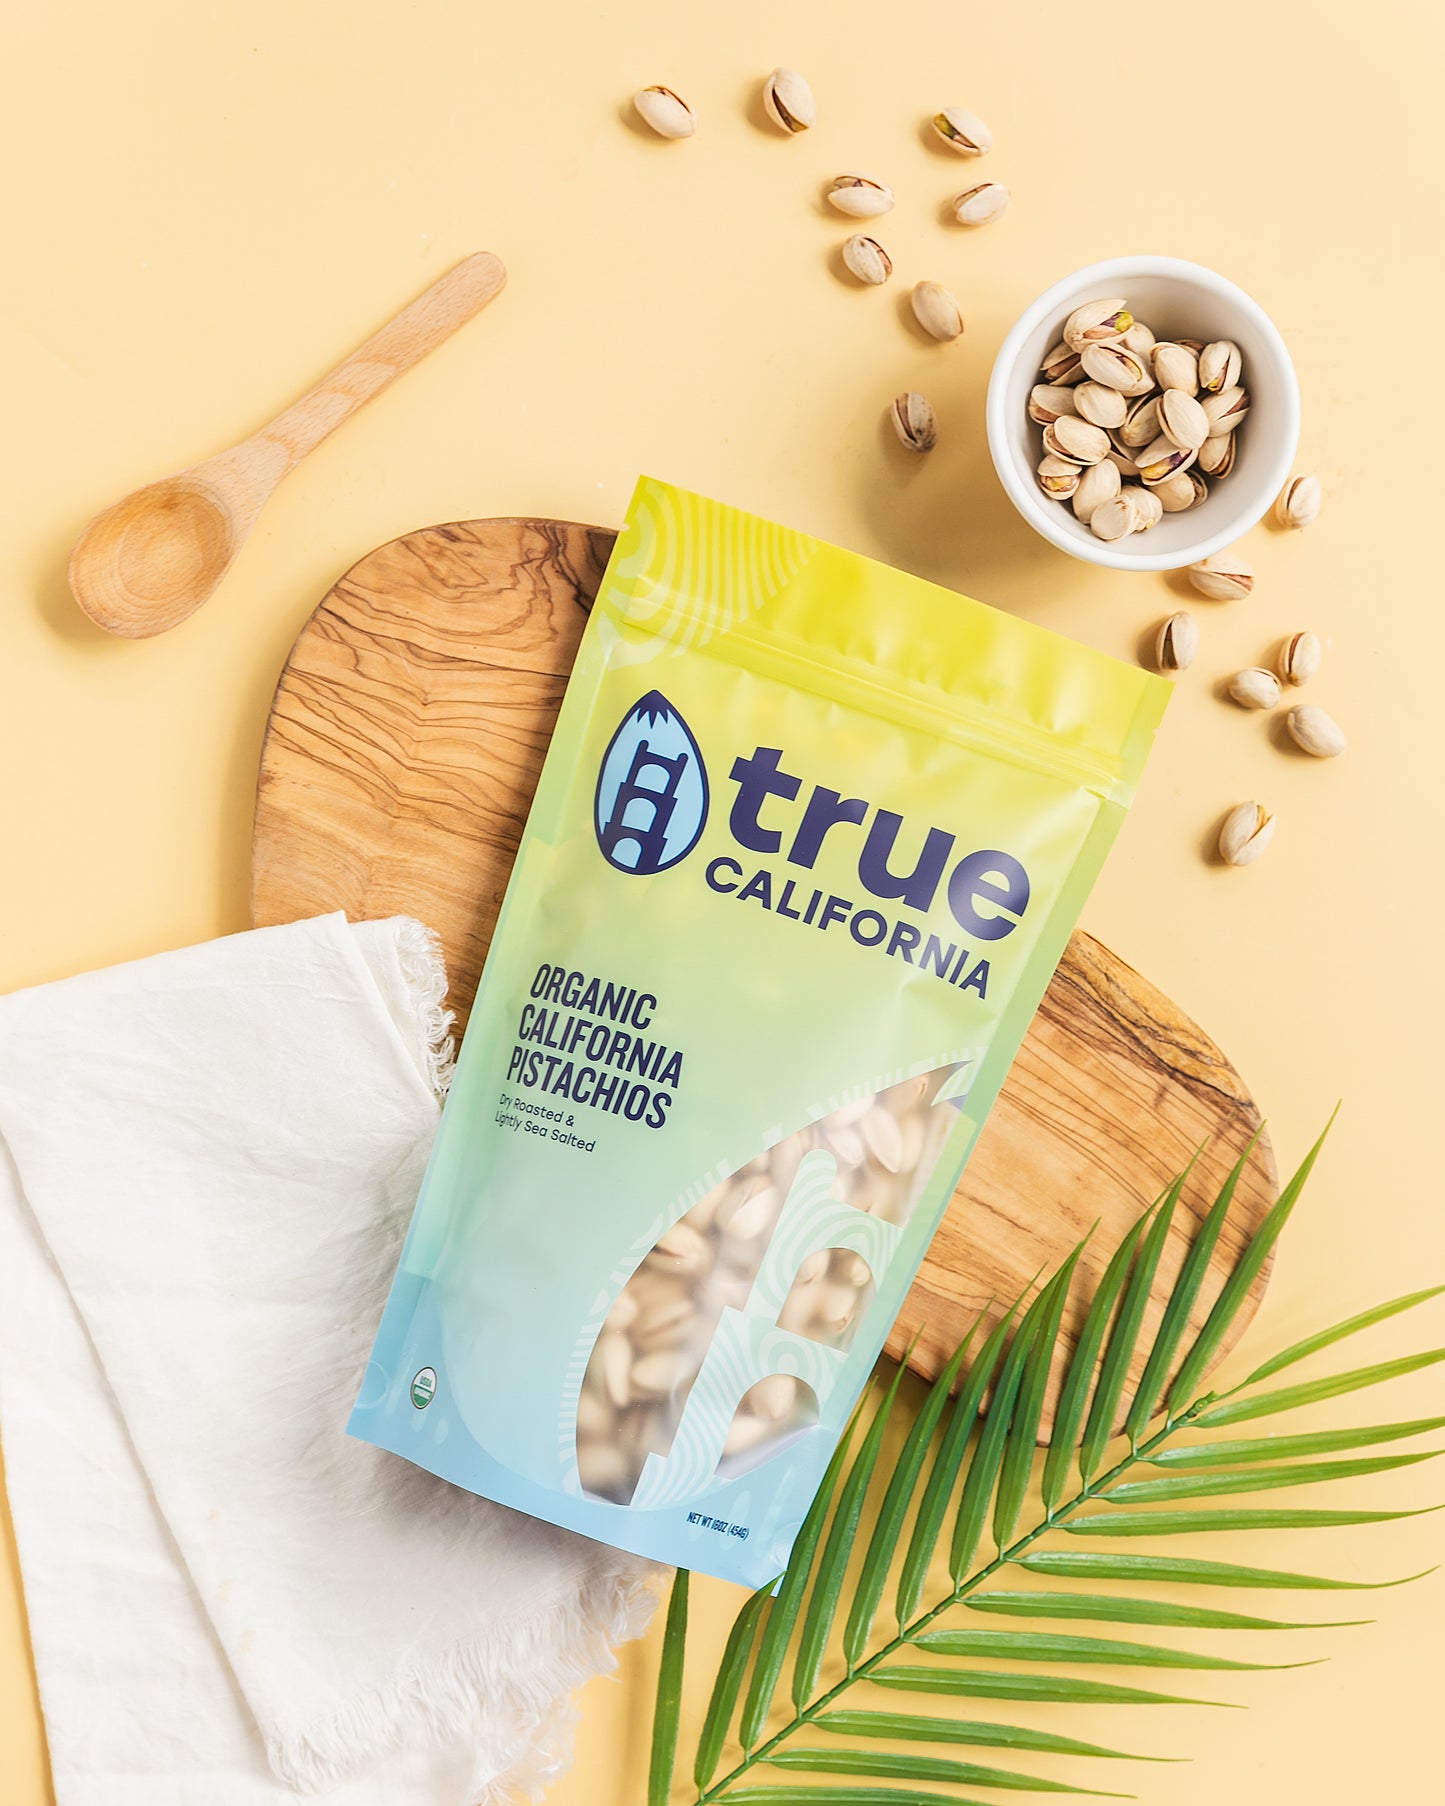 True California Organic Pistachios Dry Roasted and Lightly Sea Salted